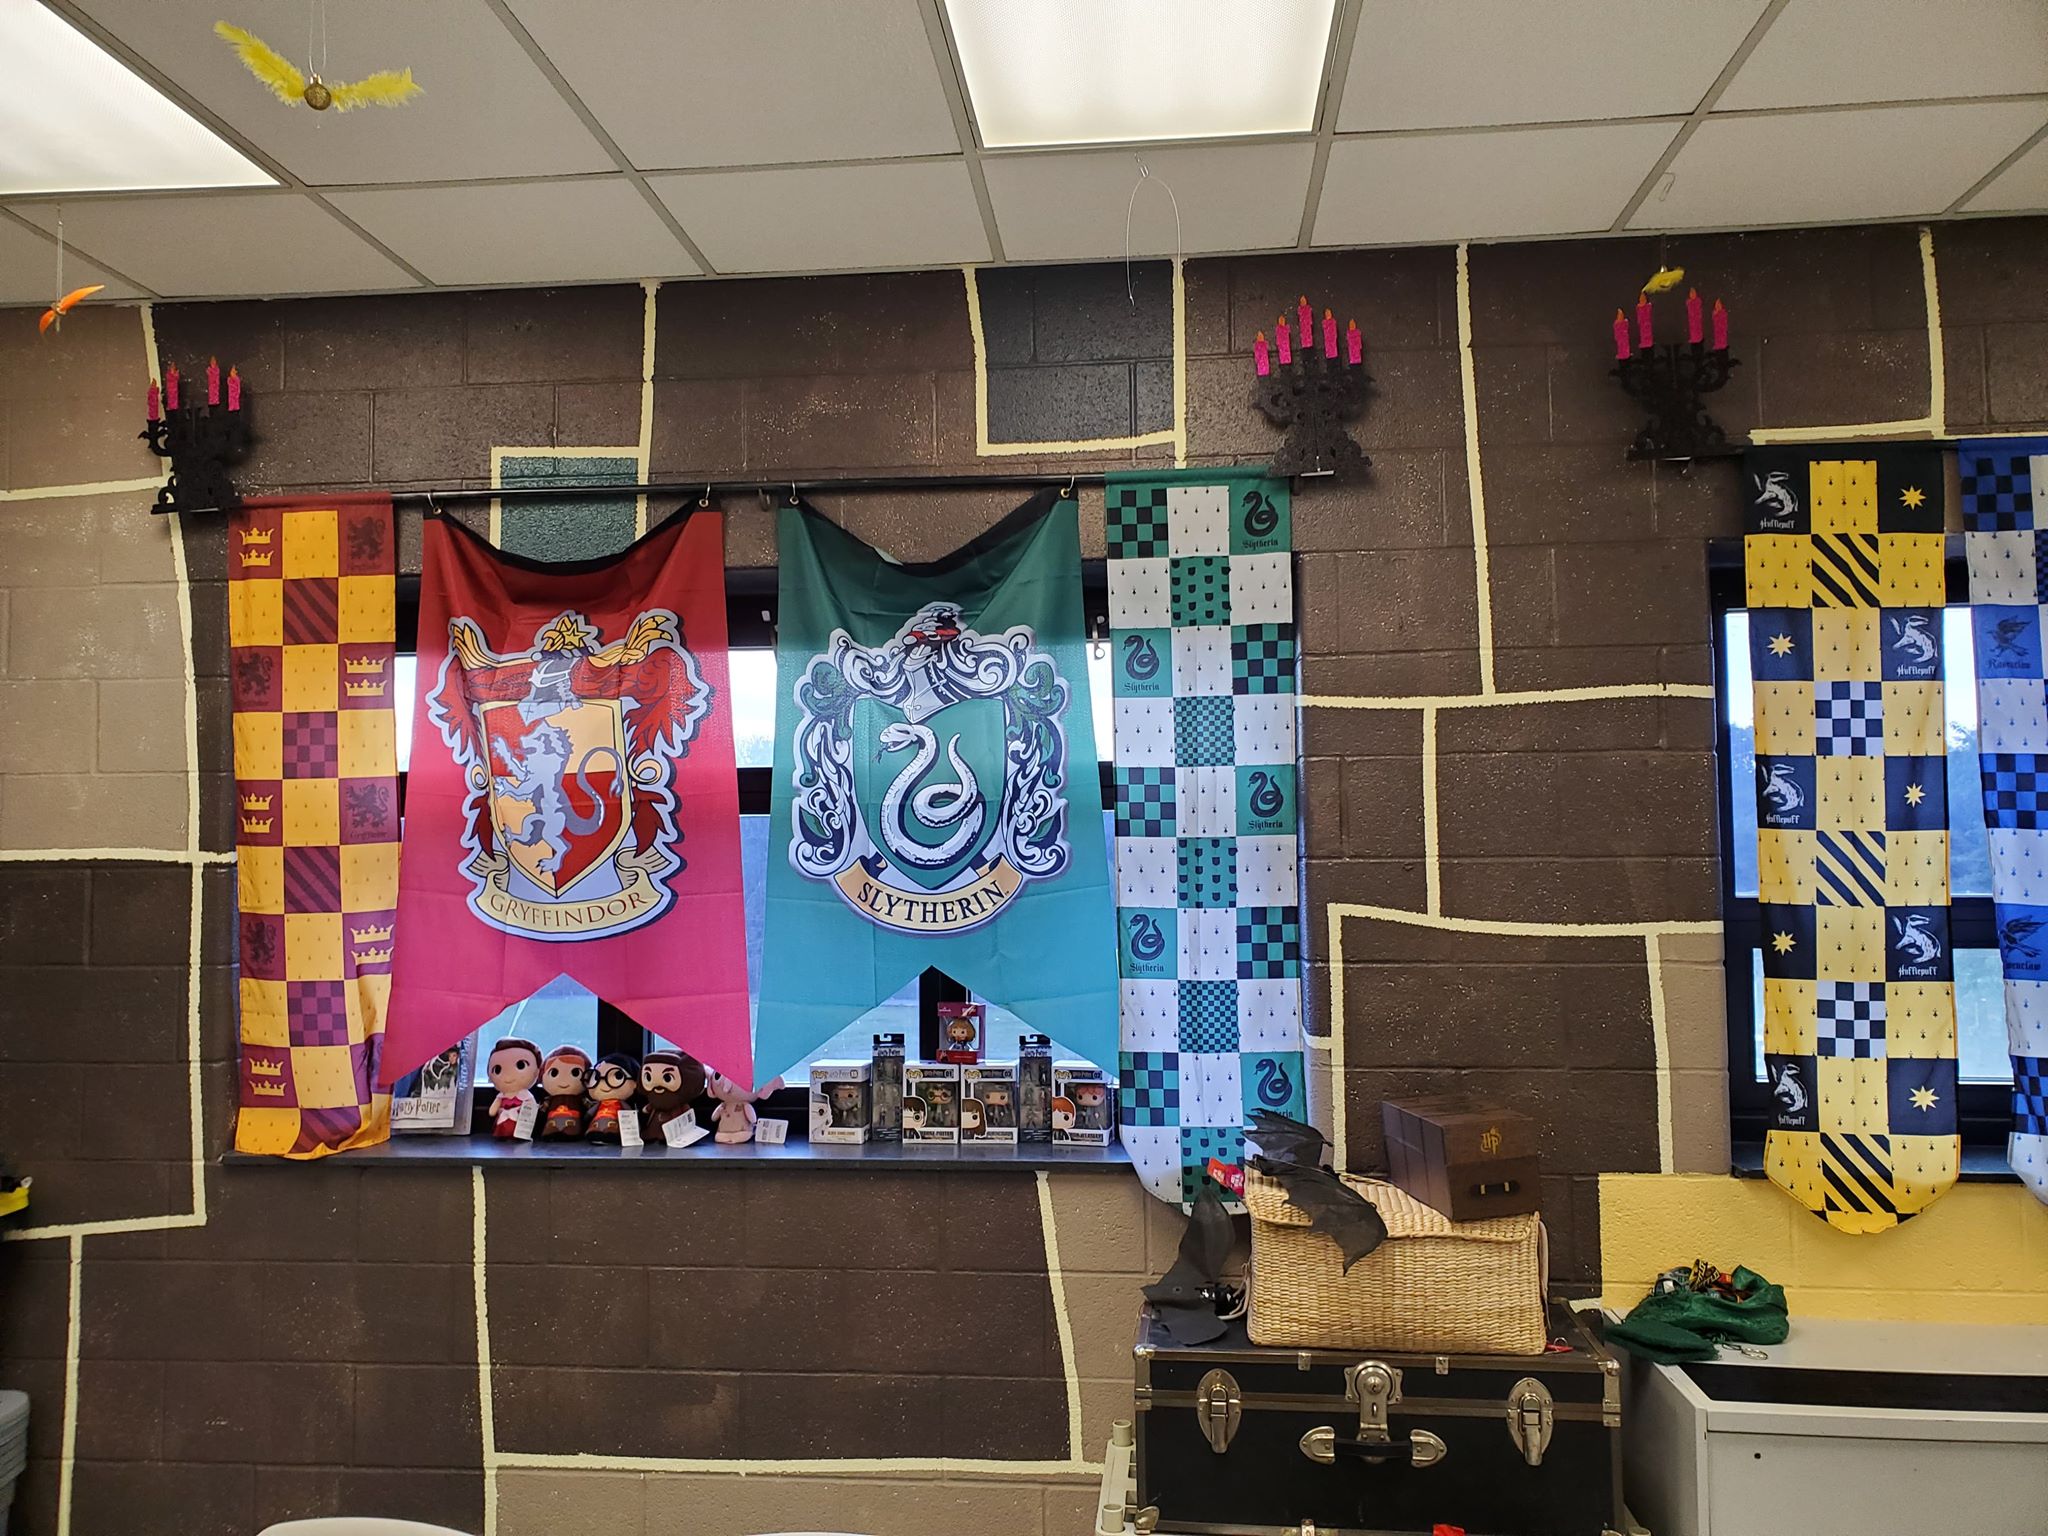 Hogwarts house banners for Gryffindor and Slytherin.